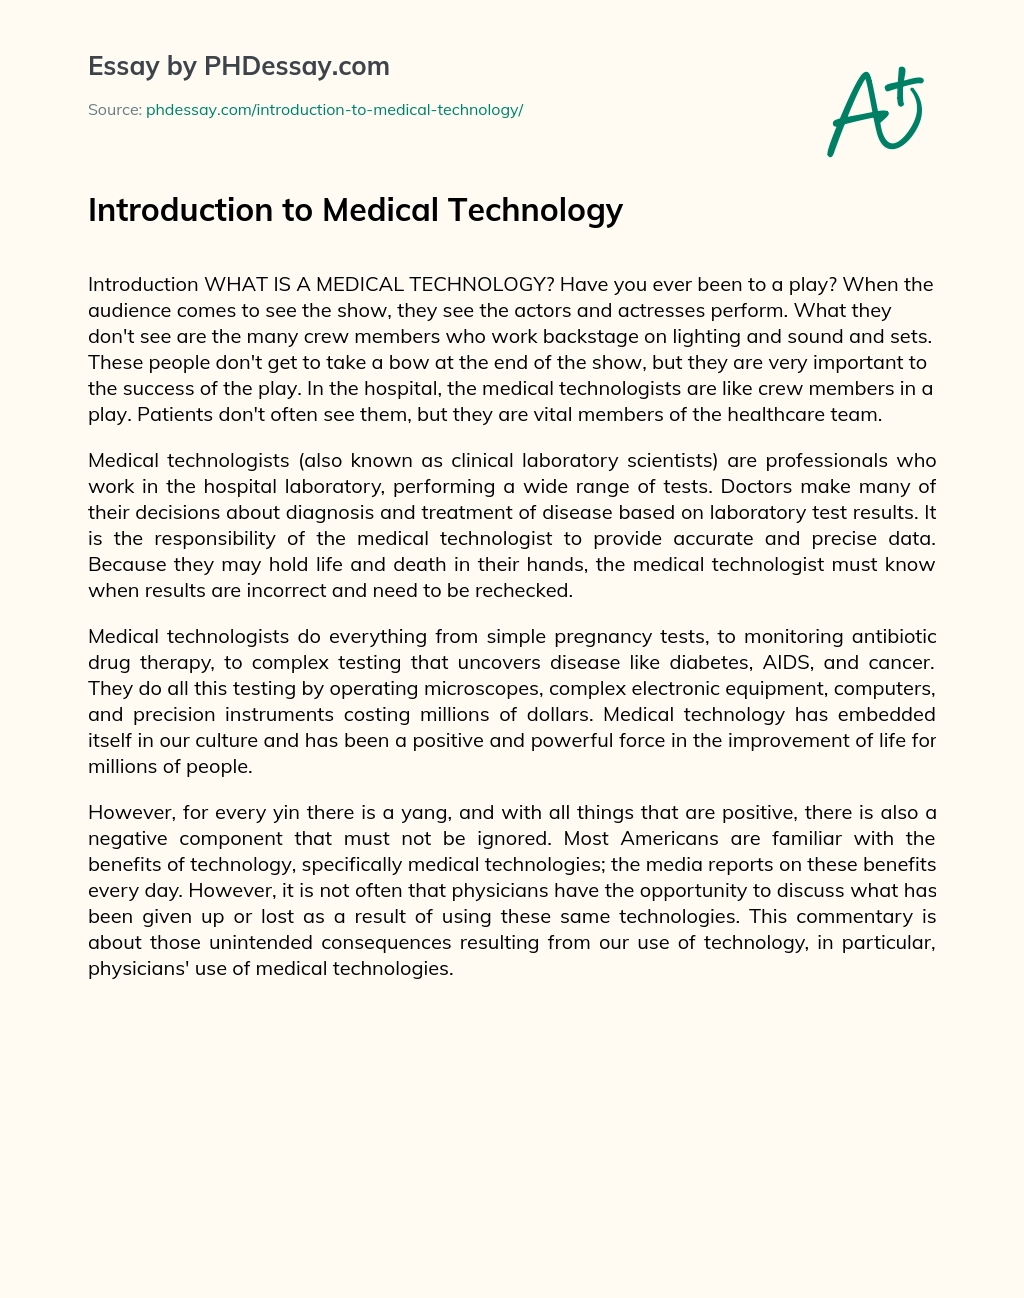 Introduction to Medical Technology essay